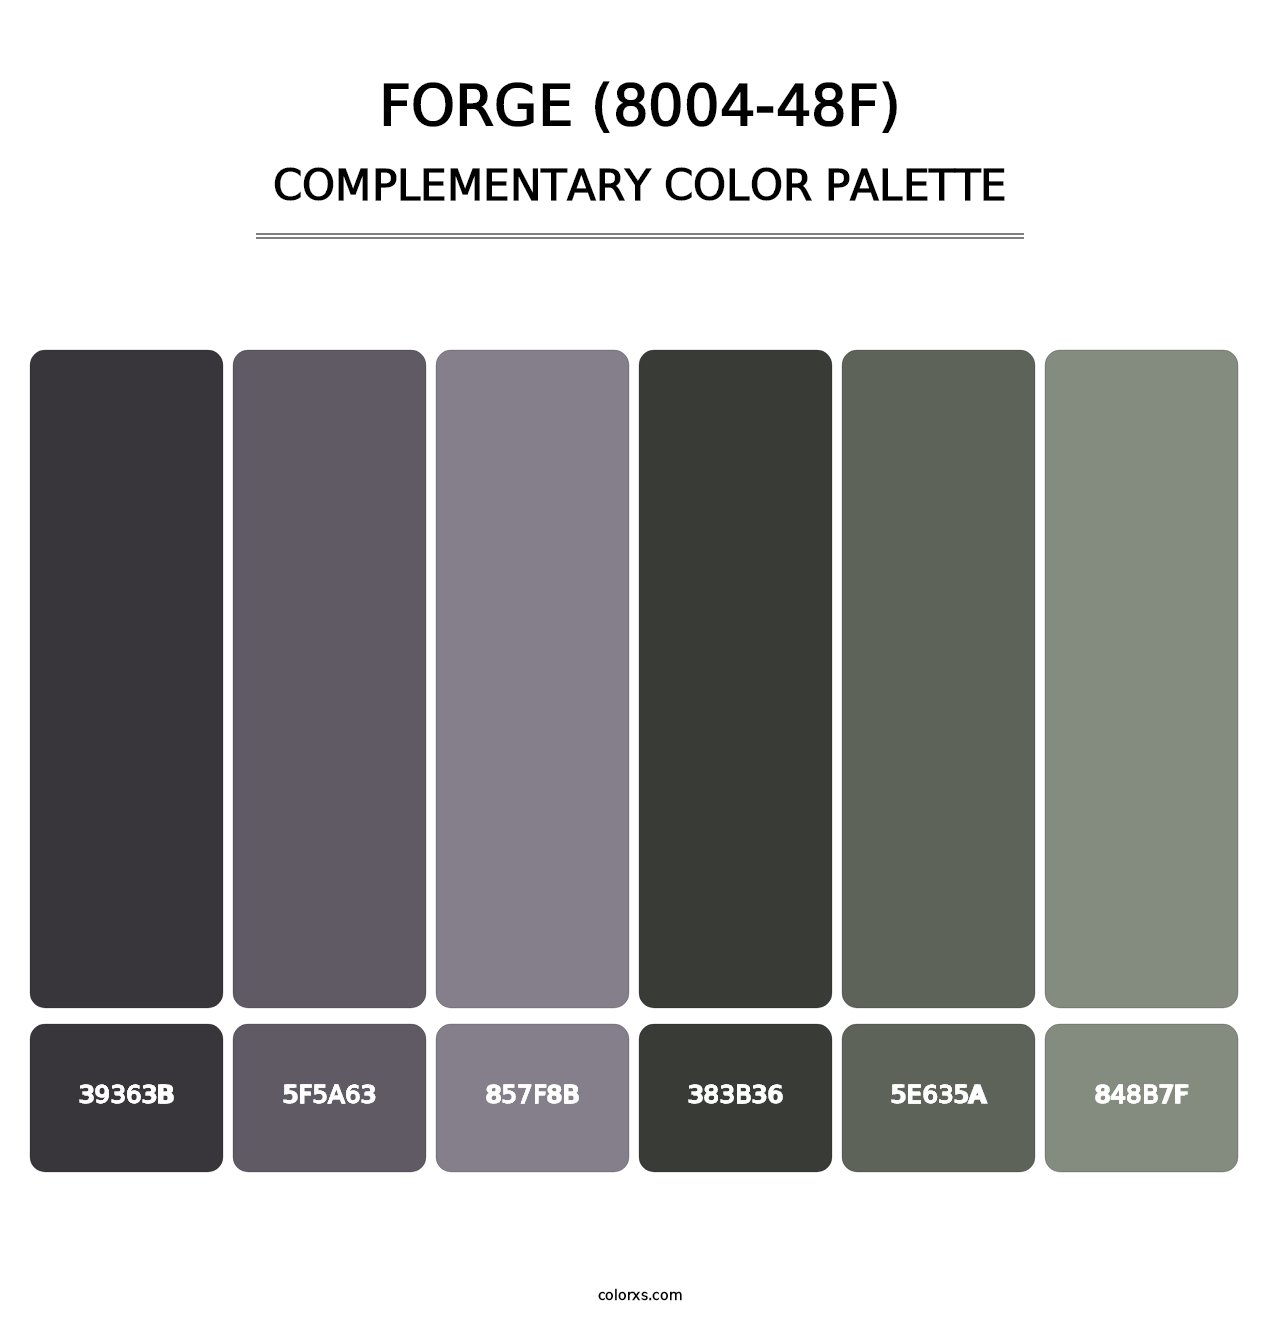 Forge (8004-48F) - Complementary Color Palette